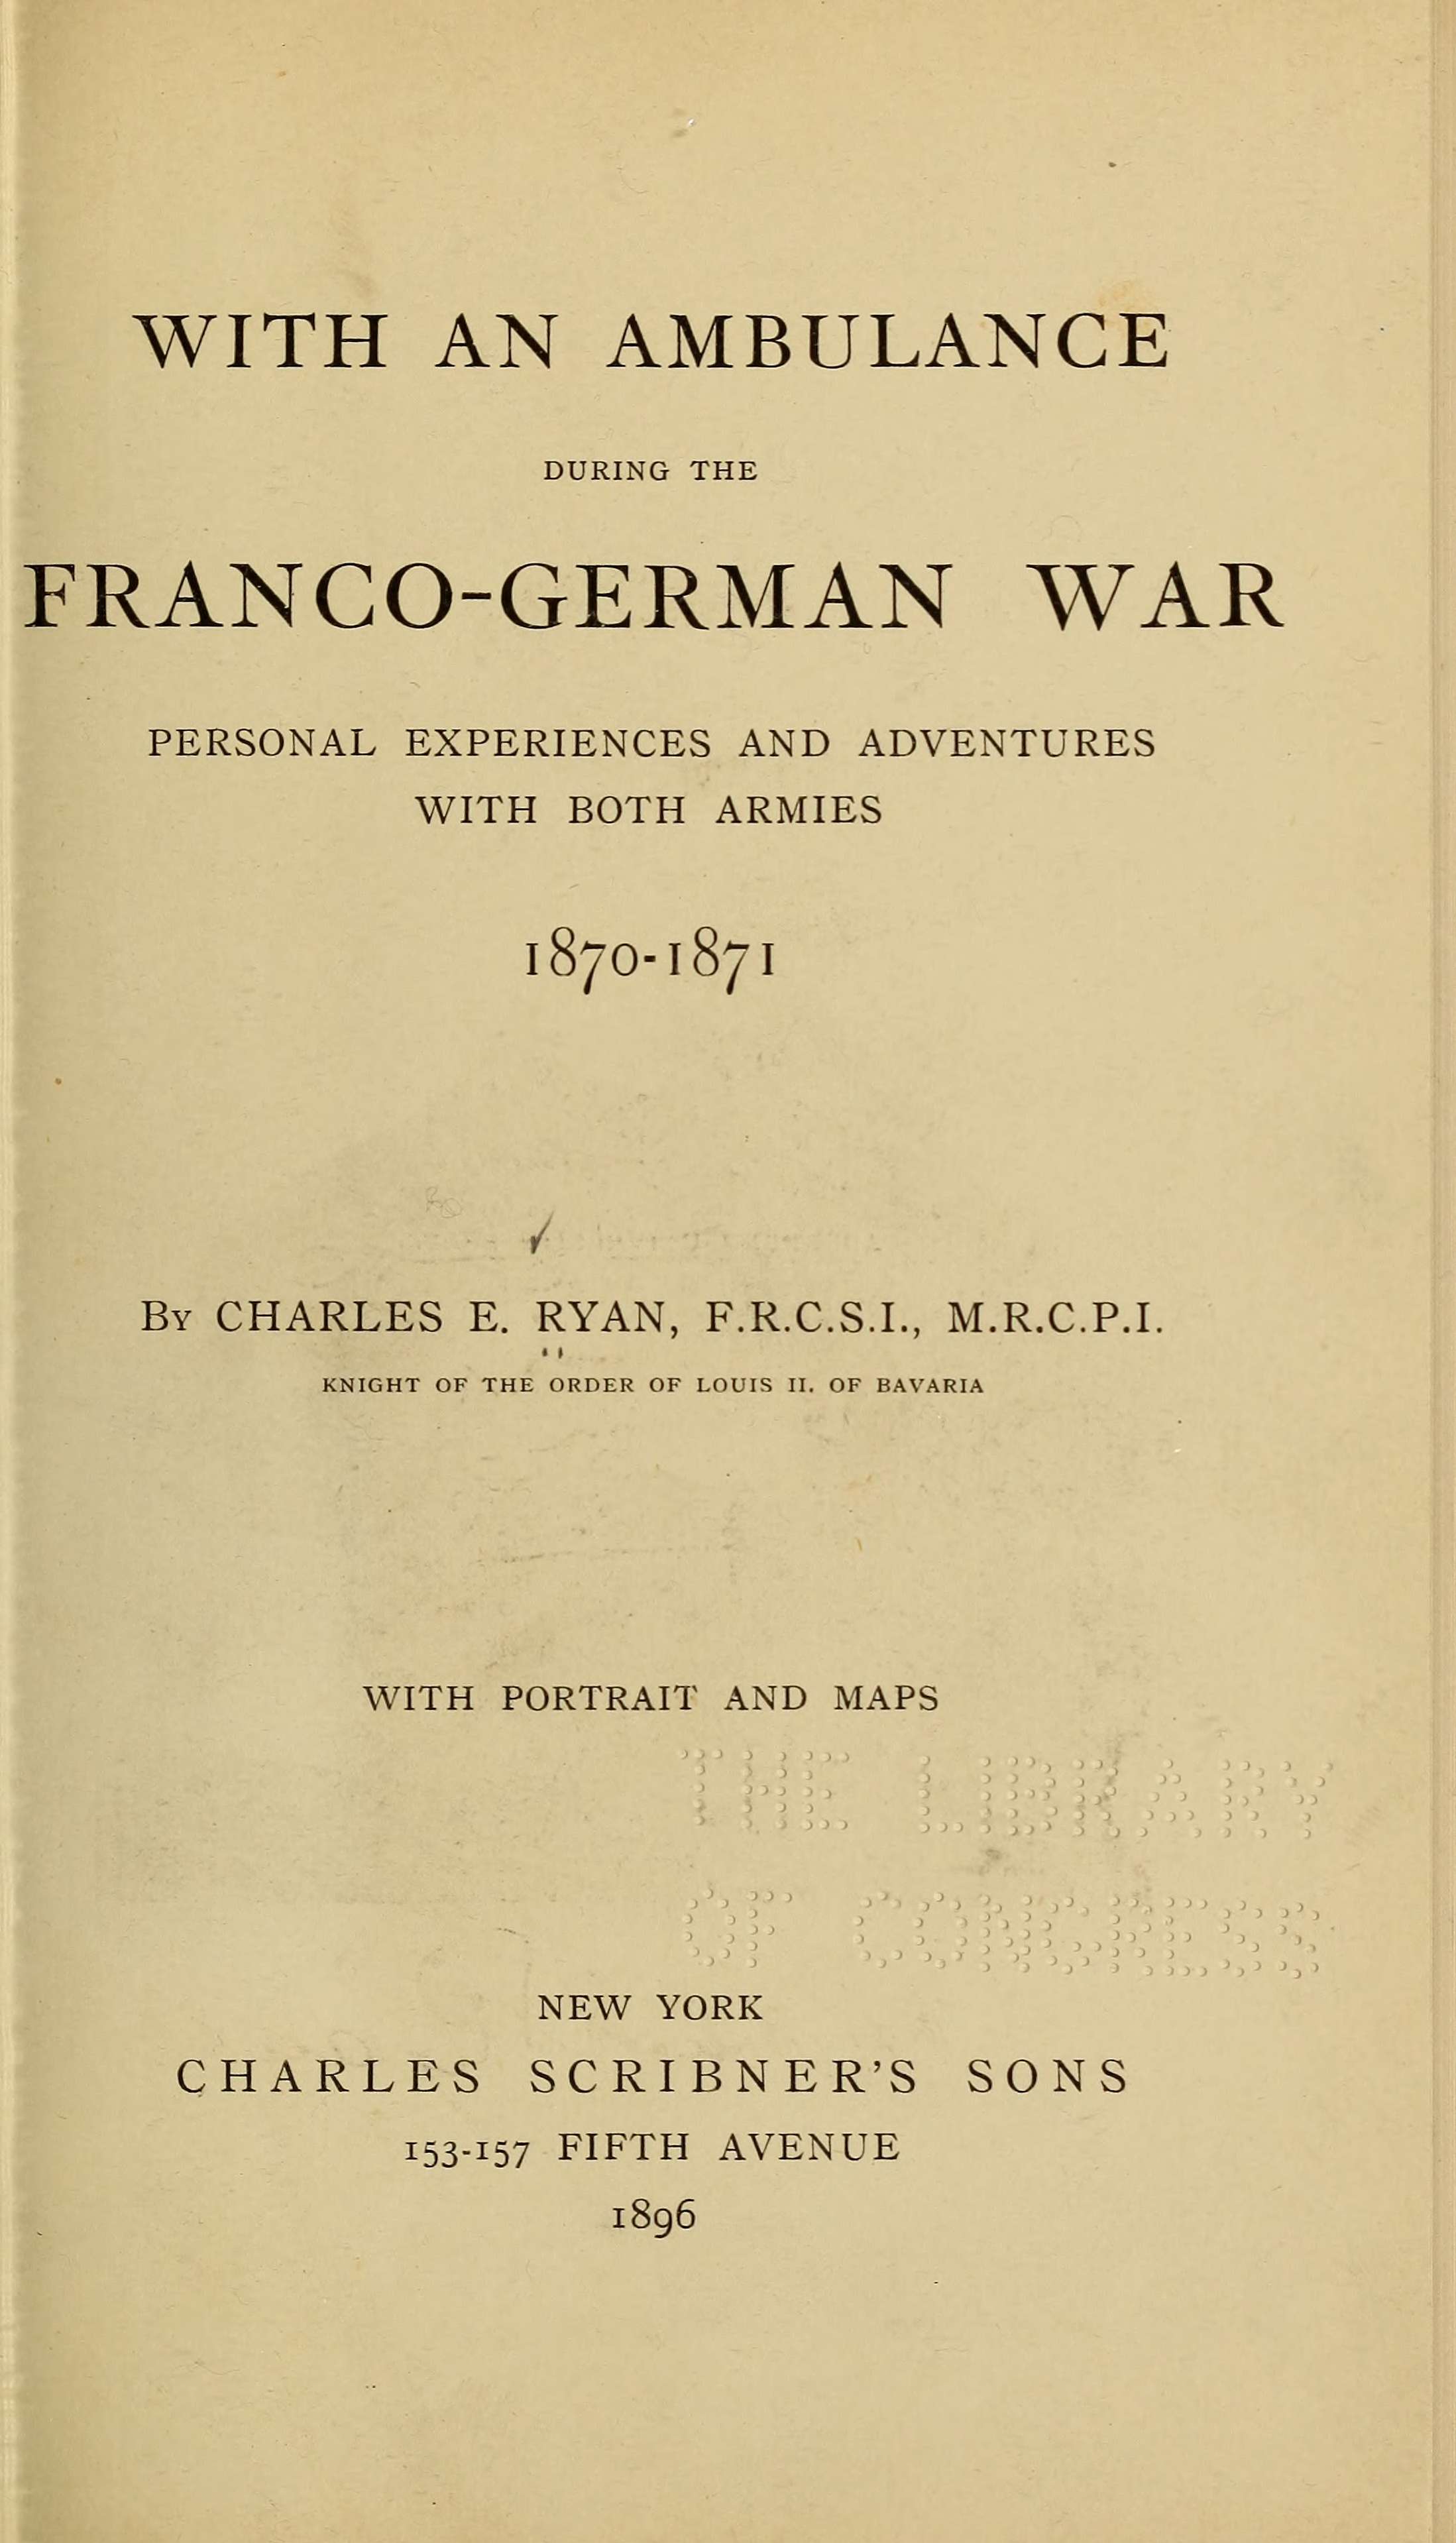 With an Ambulance During the Franco-German War&#10;Personal Experiences and Adventures with Both Armies, 1870-1871